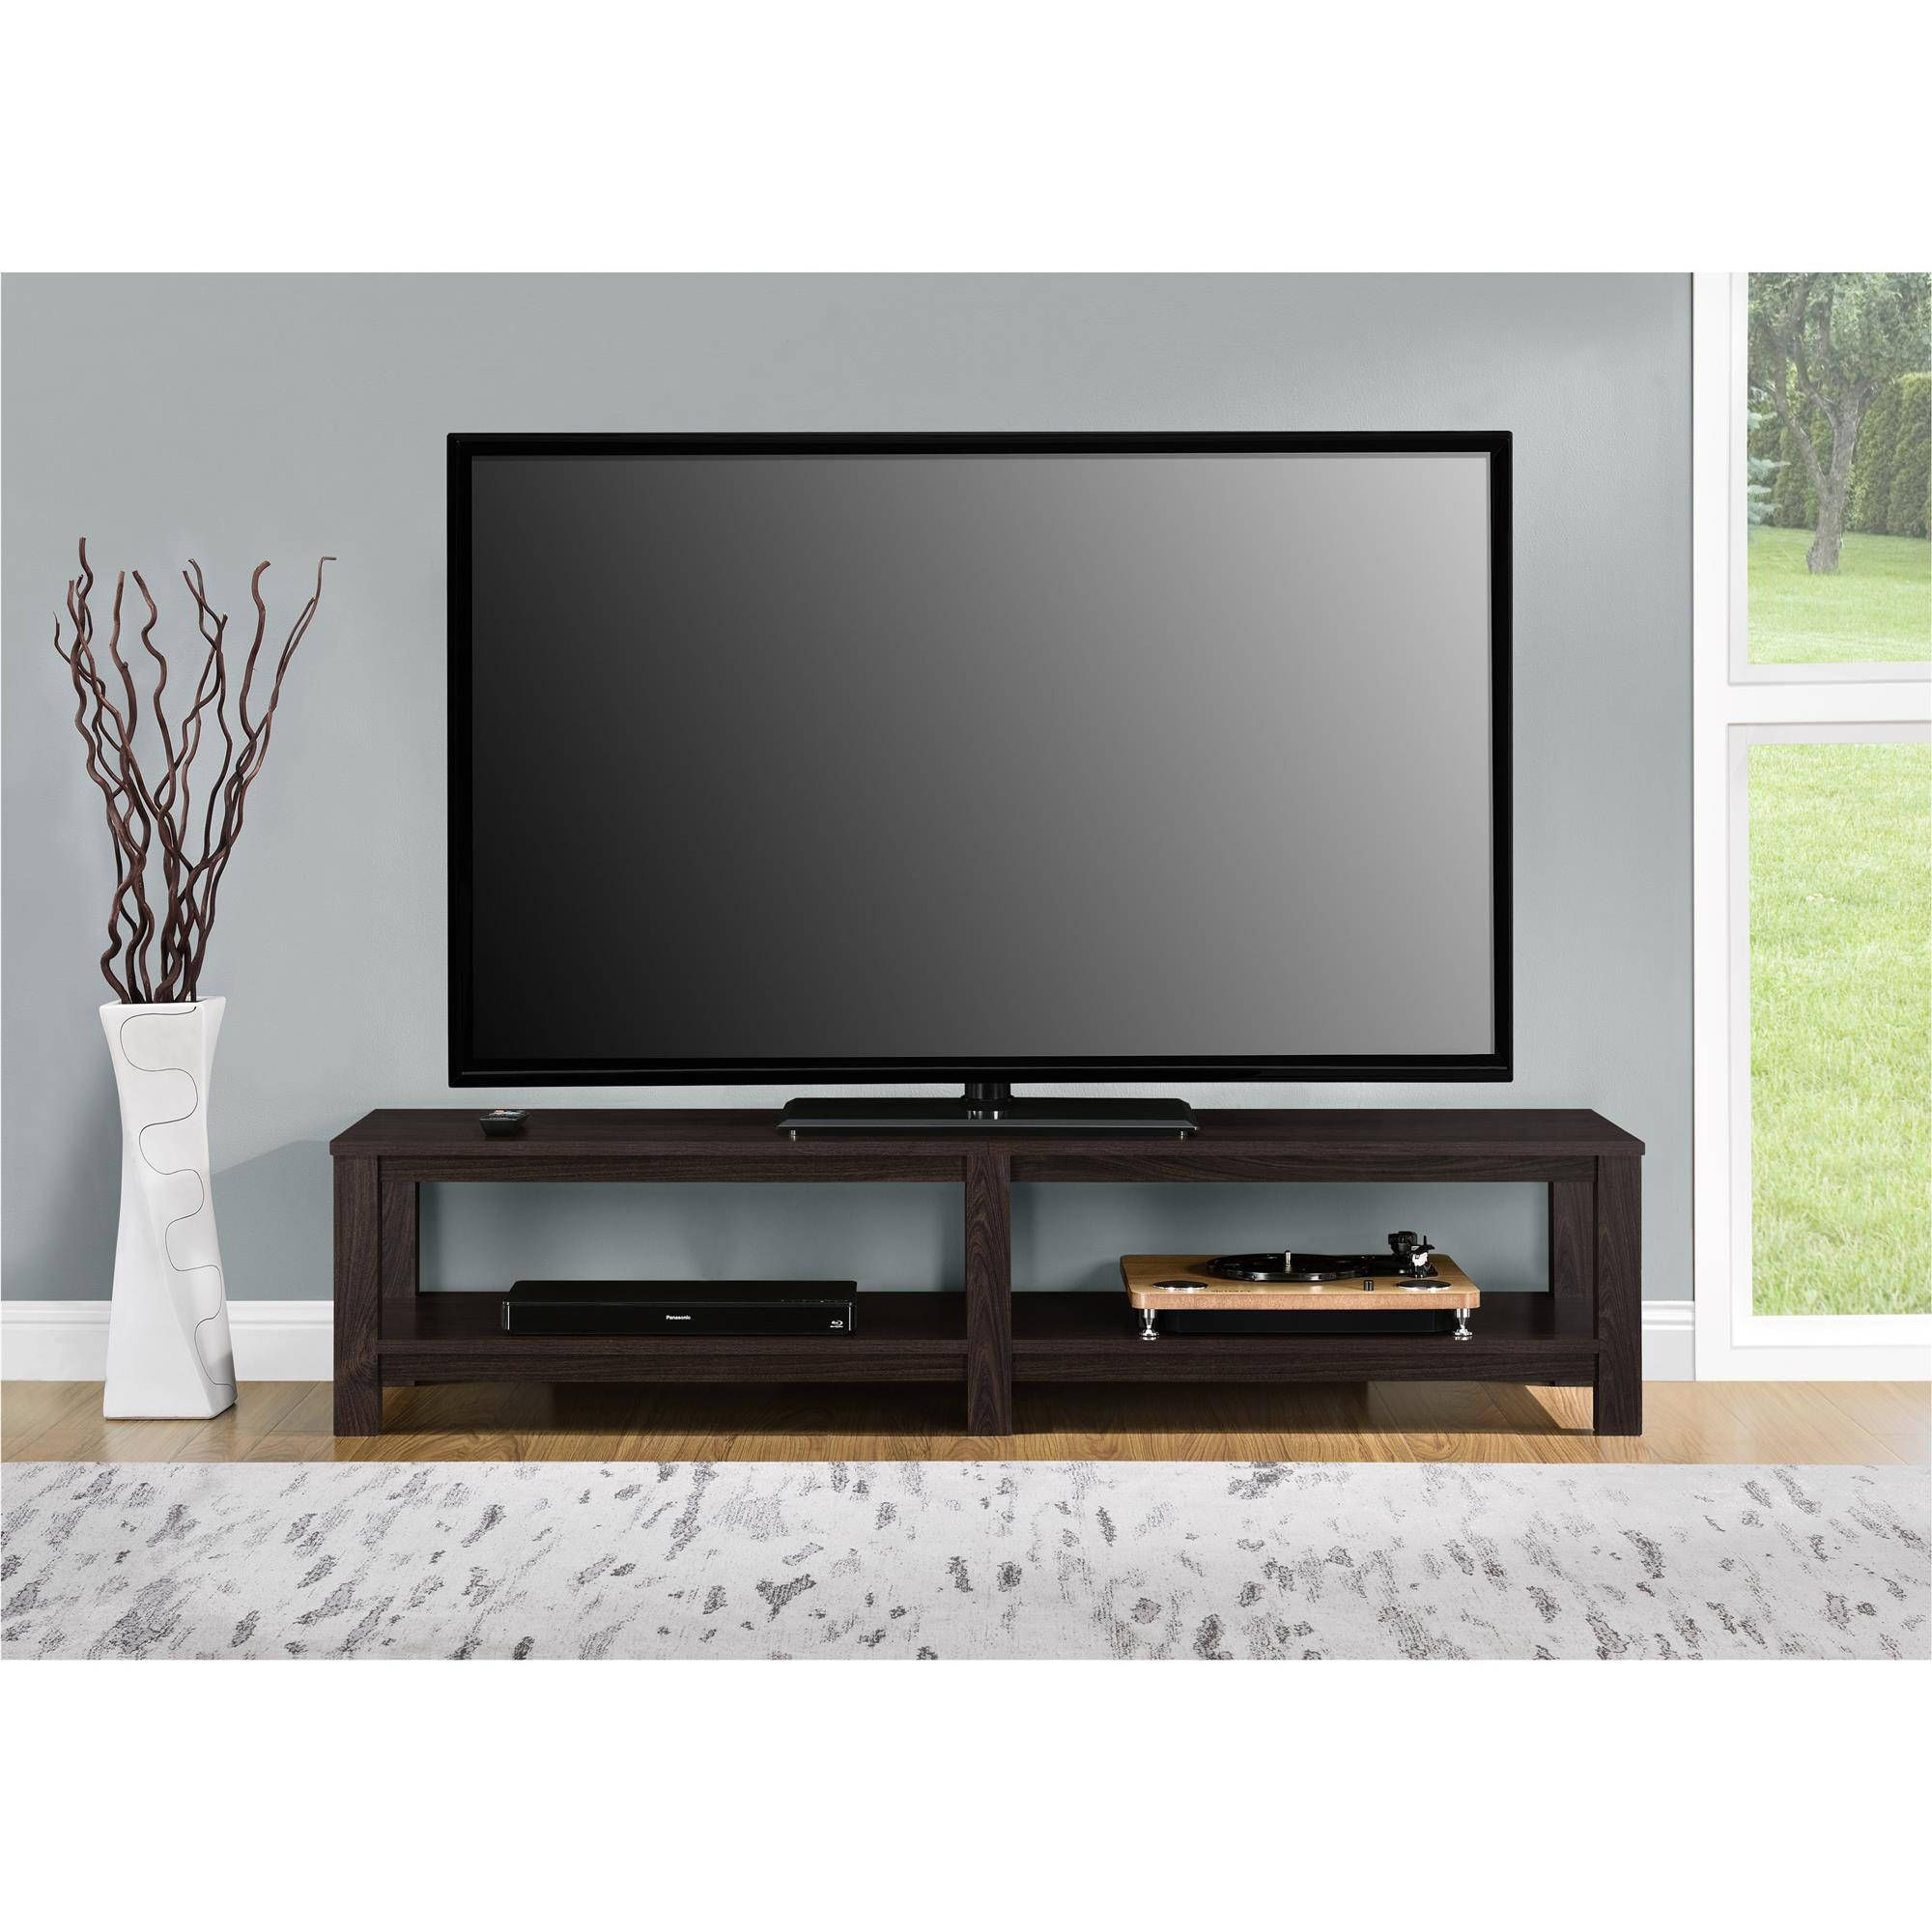 65 Inch Tv Media Entertainment Stand Console Table Mount Inside Mainstays Parsons Tv Stands With Multiple Finishes (View 1 of 15)